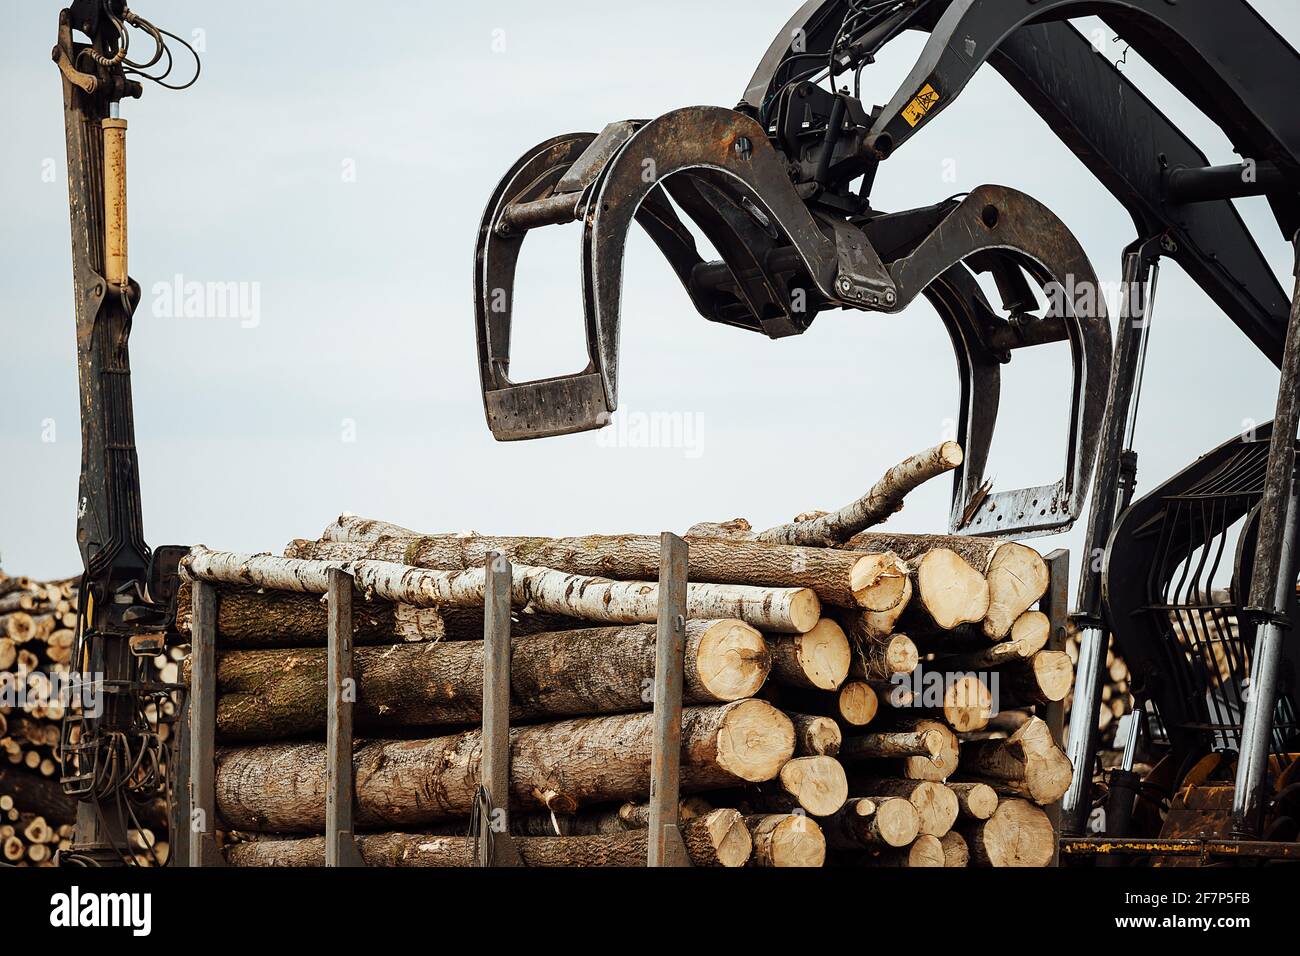 the front loader works in a wood processing plant. industrial excavator with mechanical gripper transports wood in the warehouse Stock Photo